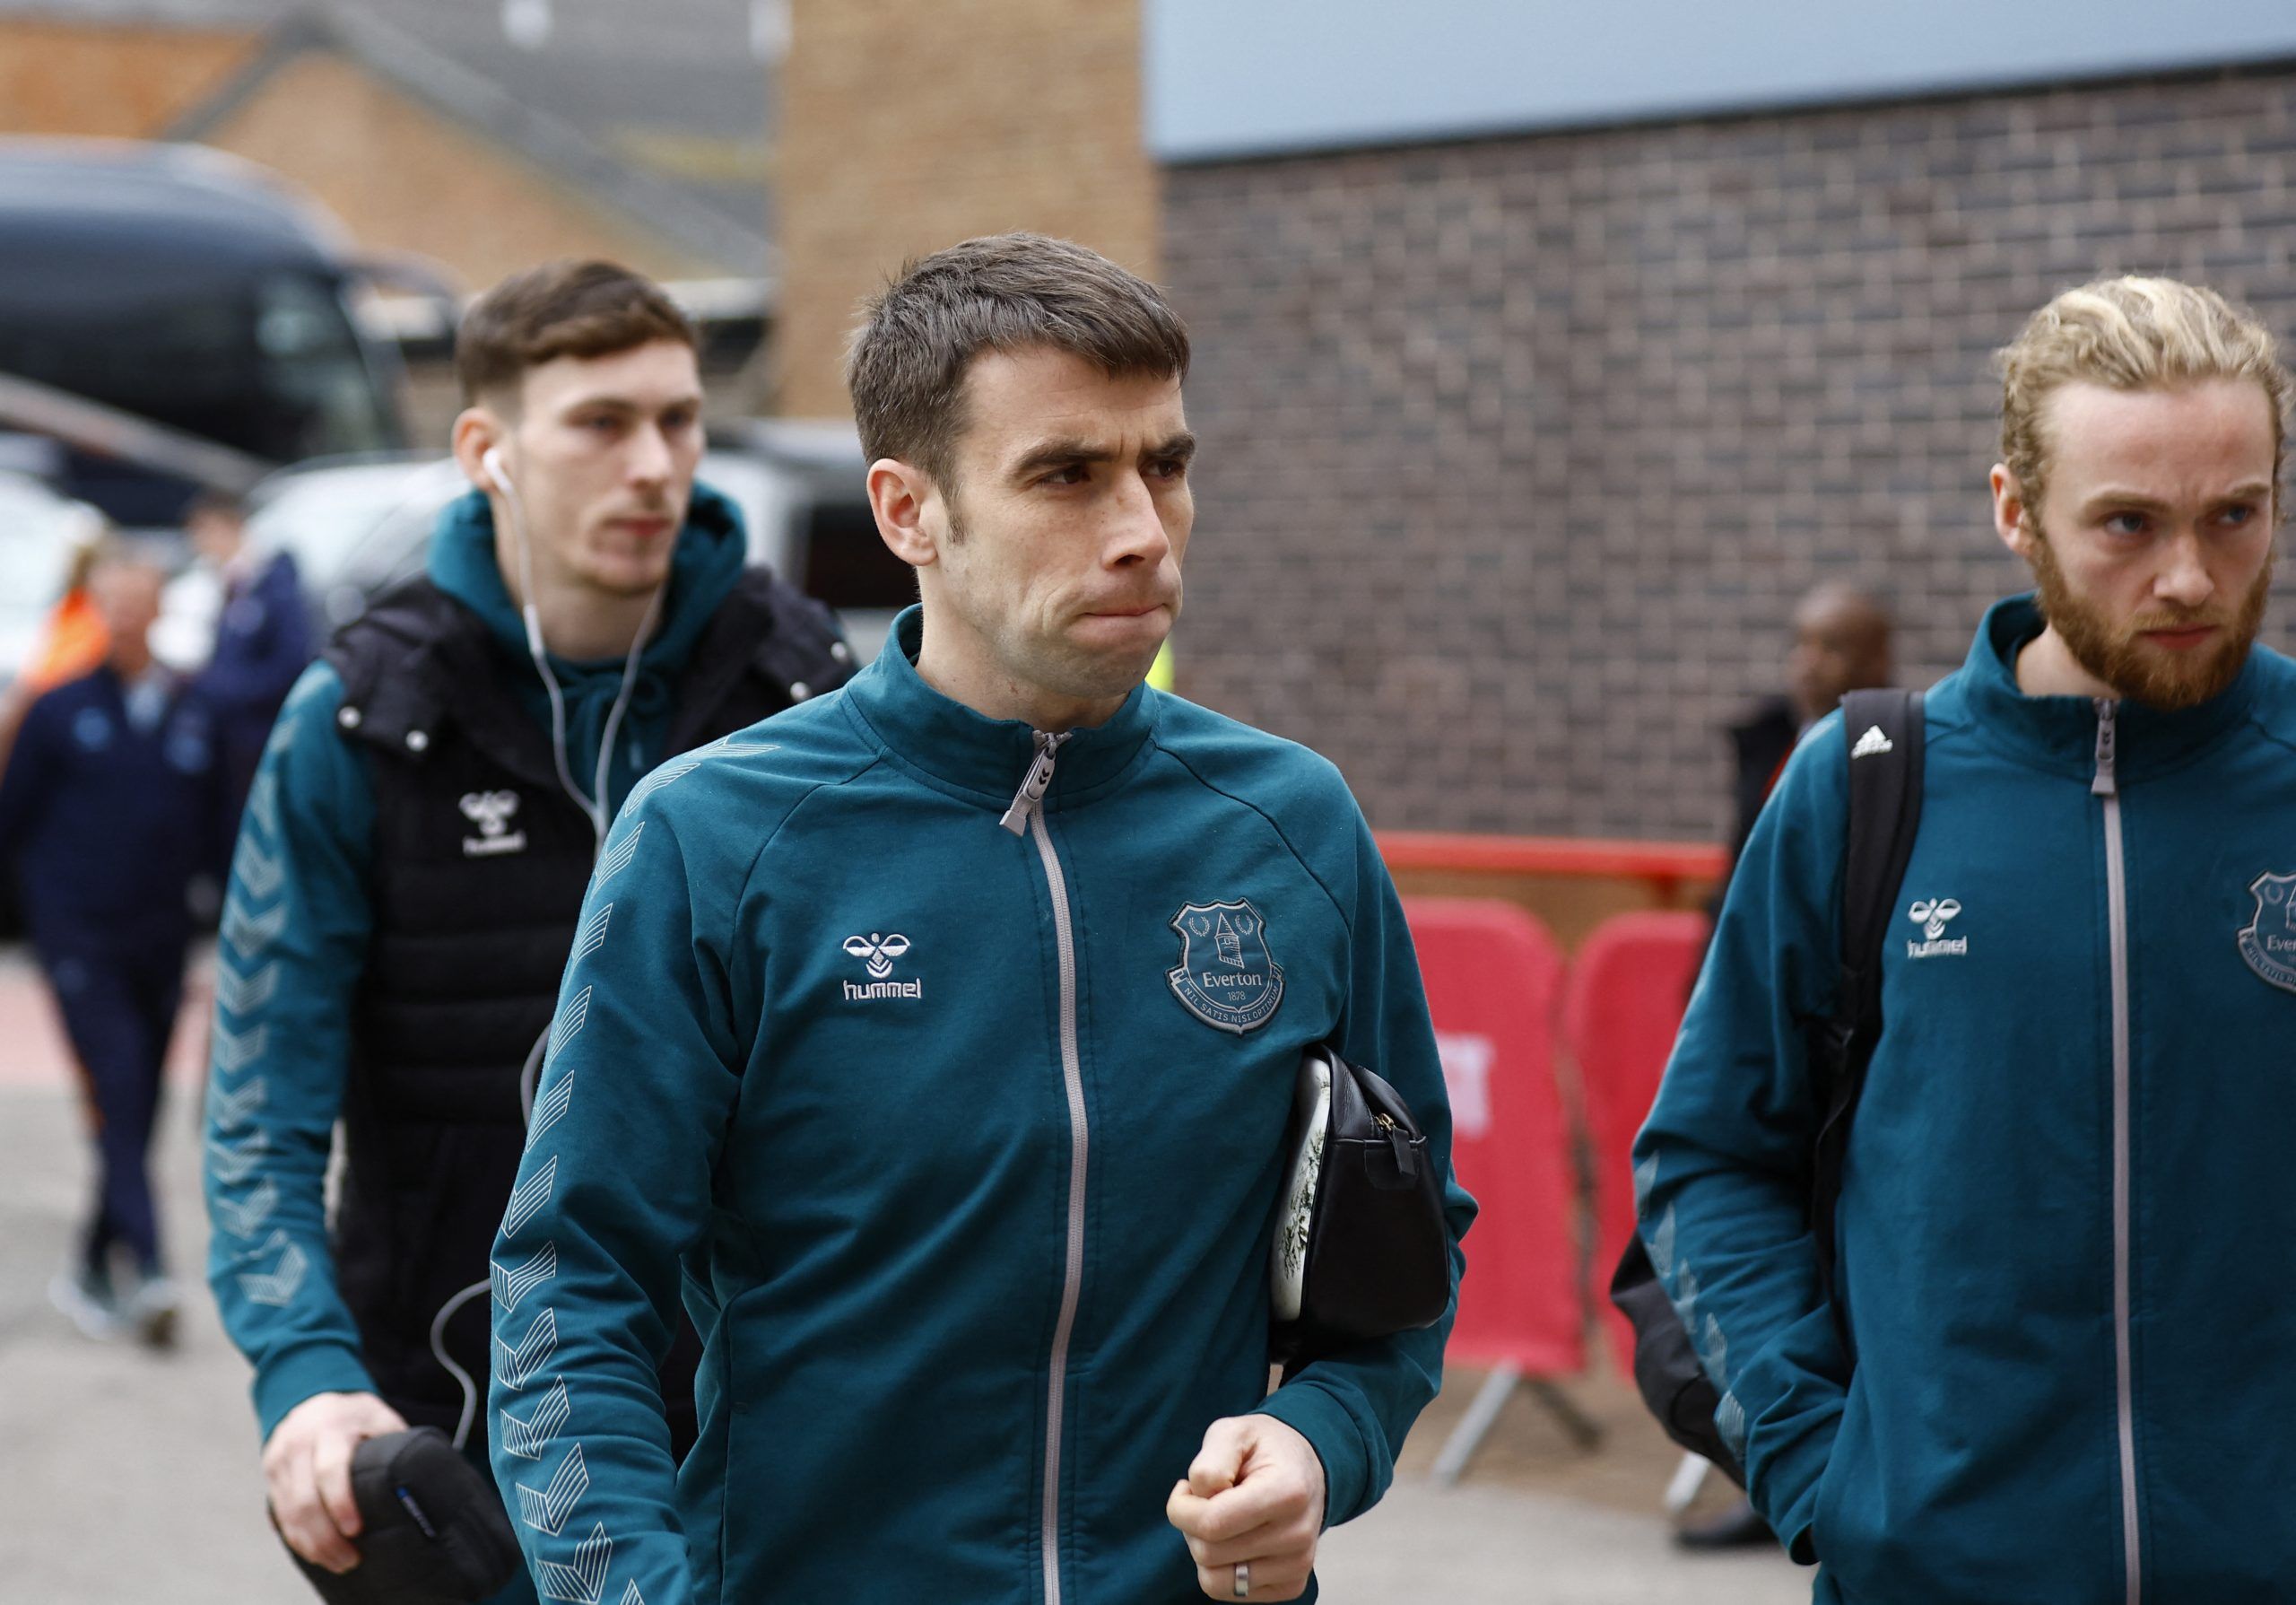 Soccer Football - Premier League - Nottingham Forest v Everton - The City Ground, Nottingham, Britain - March 5, 2023 Everton's Seamus Coleman arrives at the stadium before the match Action Images via Reuters/Andrew Boyers EDITORIAL USE ONLY. No use with unauthorized audio, video, data, fixture lists, club/league logos or 'live' services. Online in-match use limited to 75 images, no video emulation. No use in betting, games or single club /league/player publications.  Please contact your account